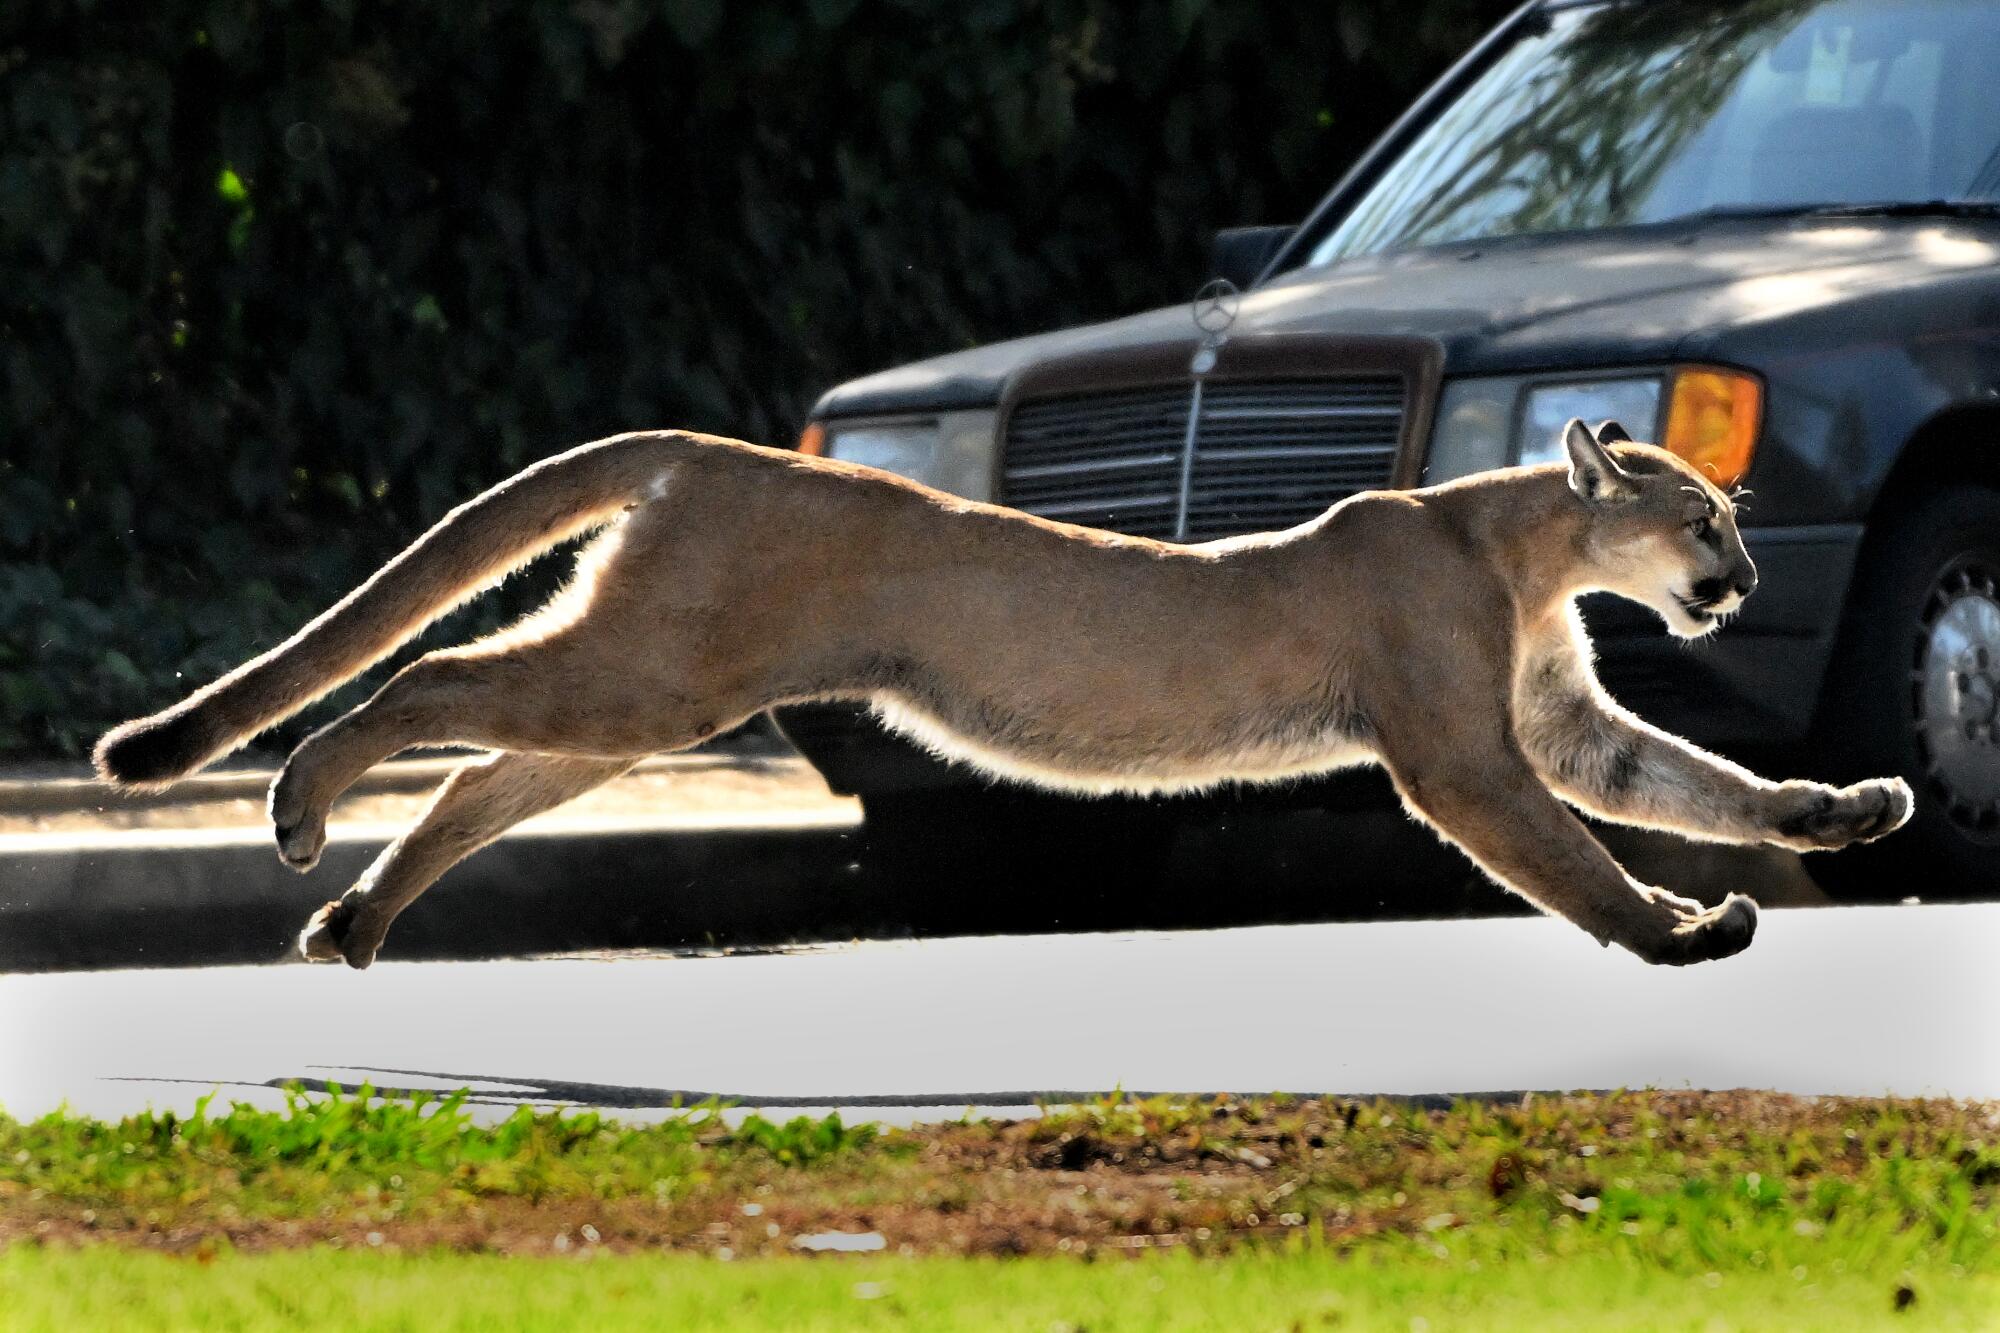 California has fewer mountain lions than previously estimated